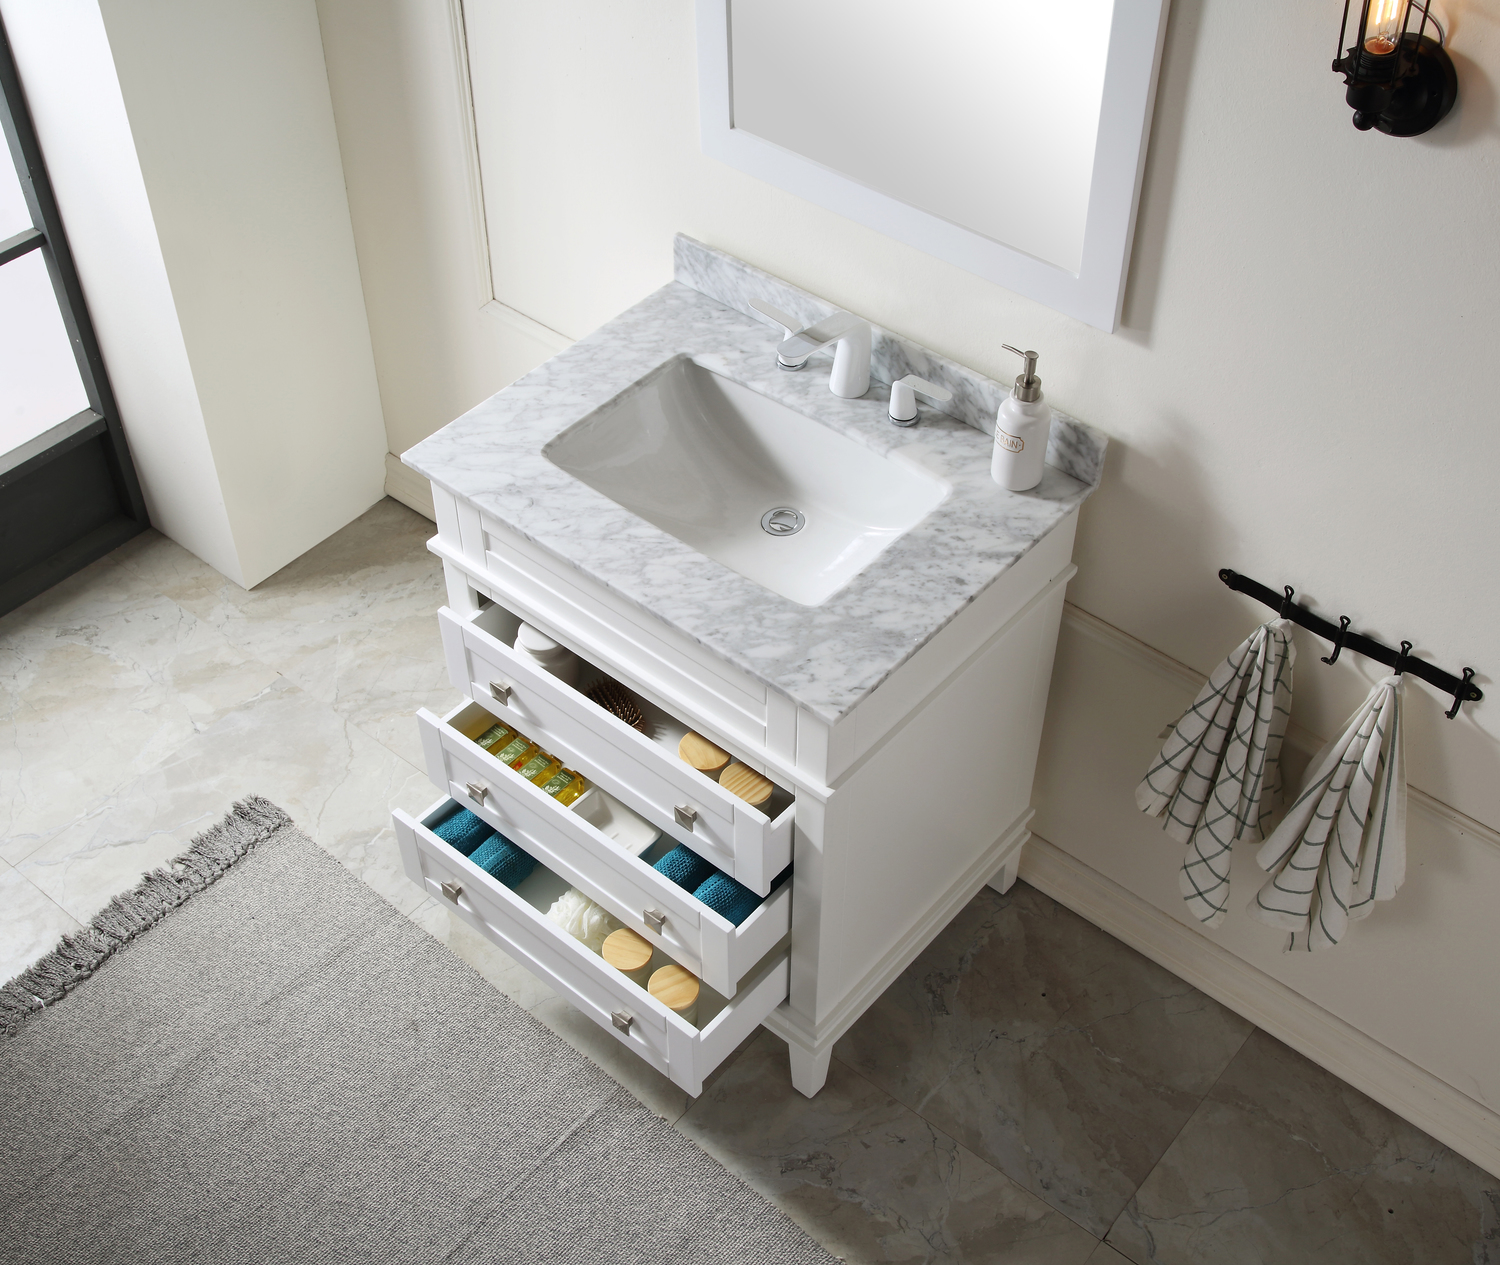 small basin with cabinet Anzzi BATHROOM - Vanities - Vanity Sets White